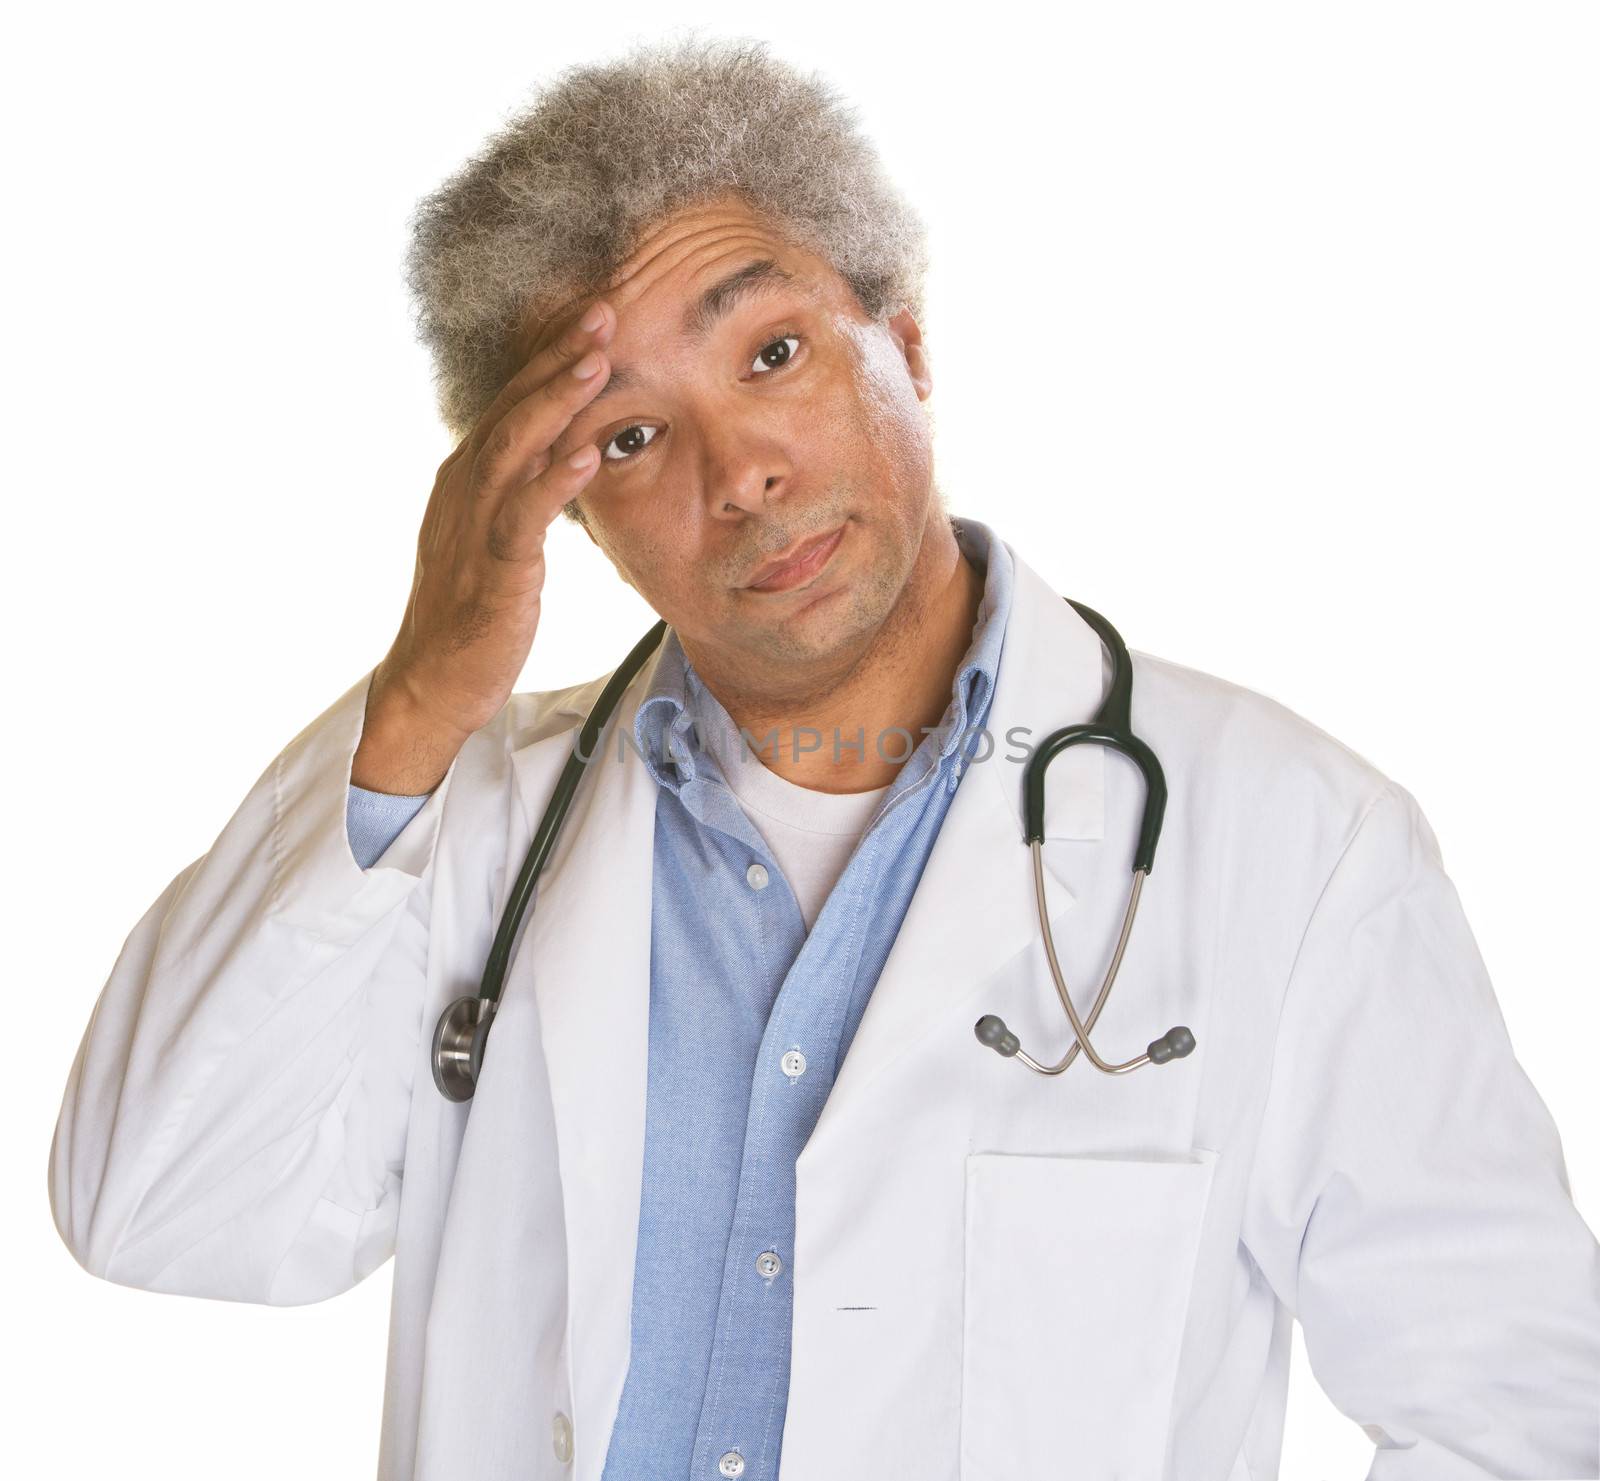 Concerned medical doctor with hand on forehead